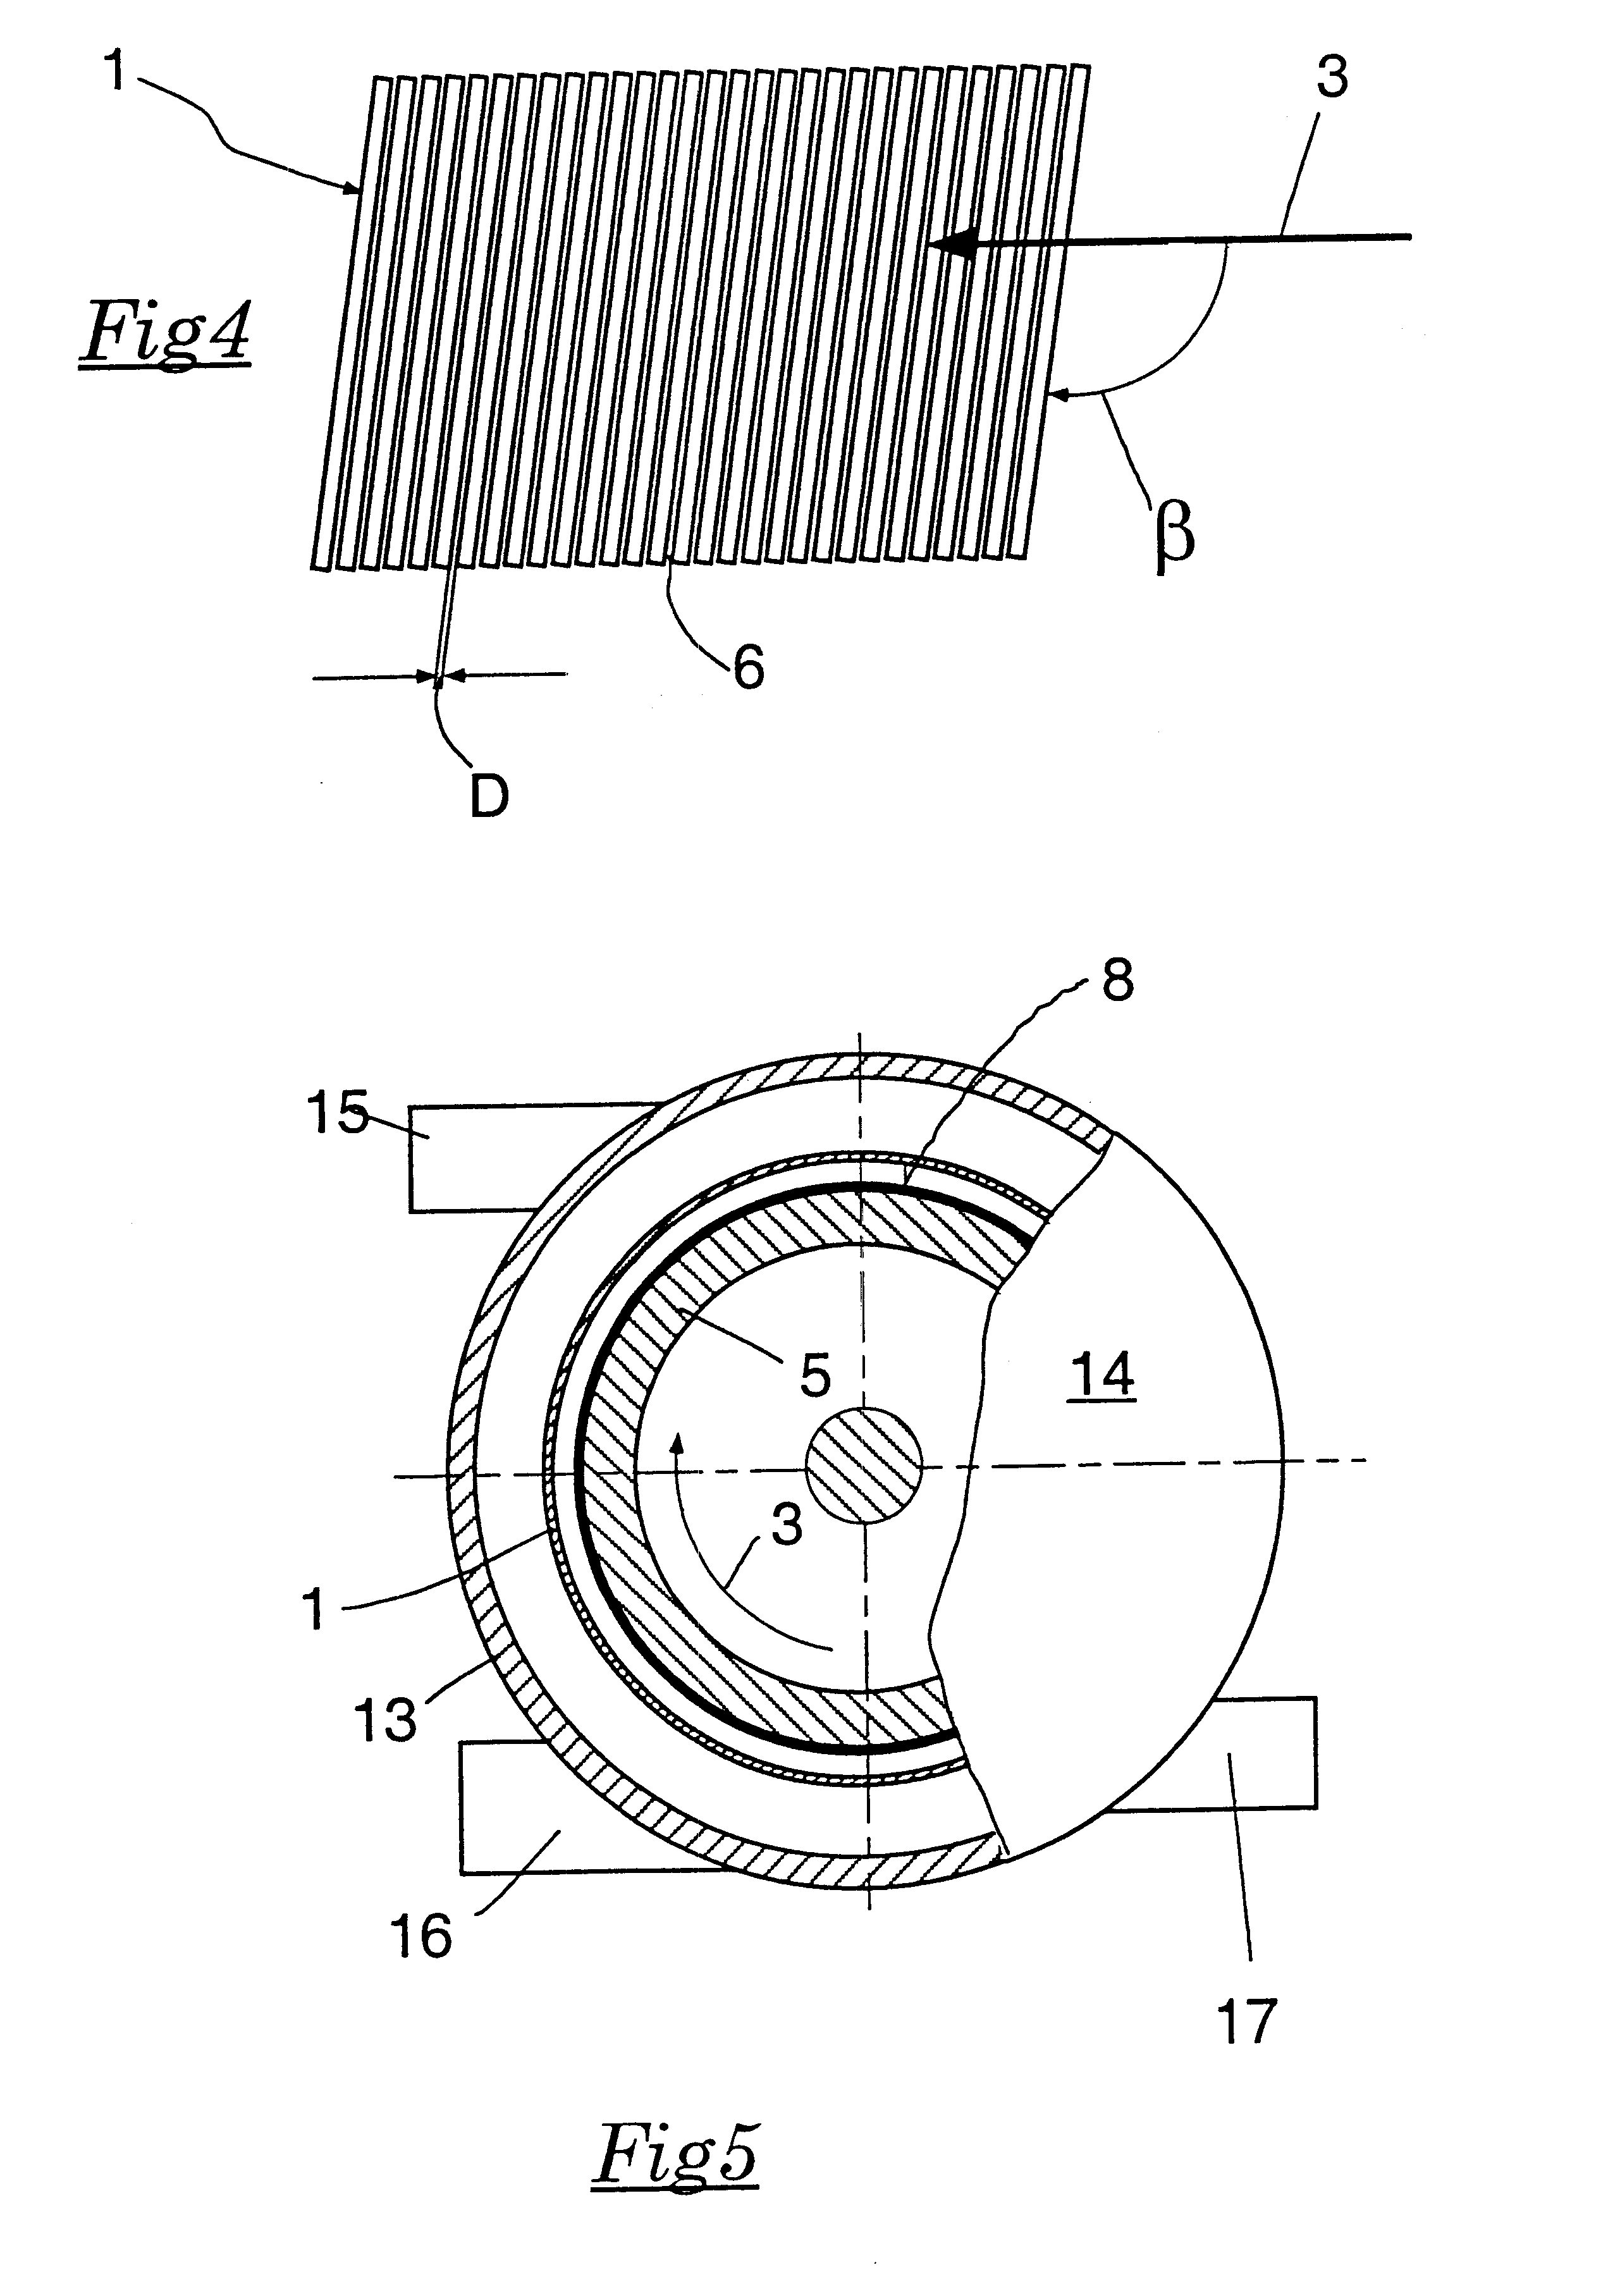 Process and device for fractioning a suspension containing paper fibers